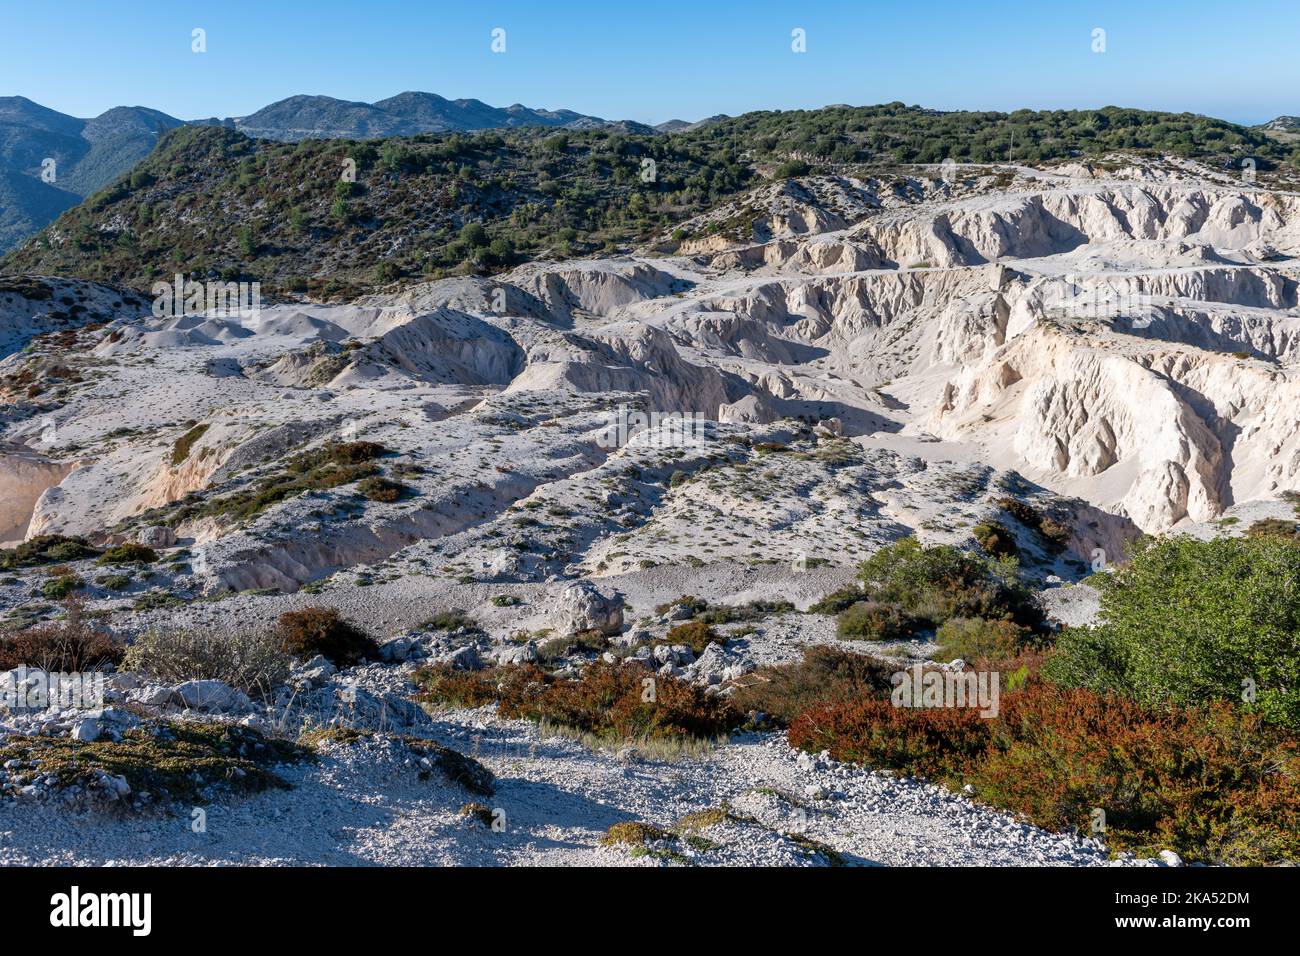 A open pit, quarry, for mining sand and stones for construction. Stock Photo